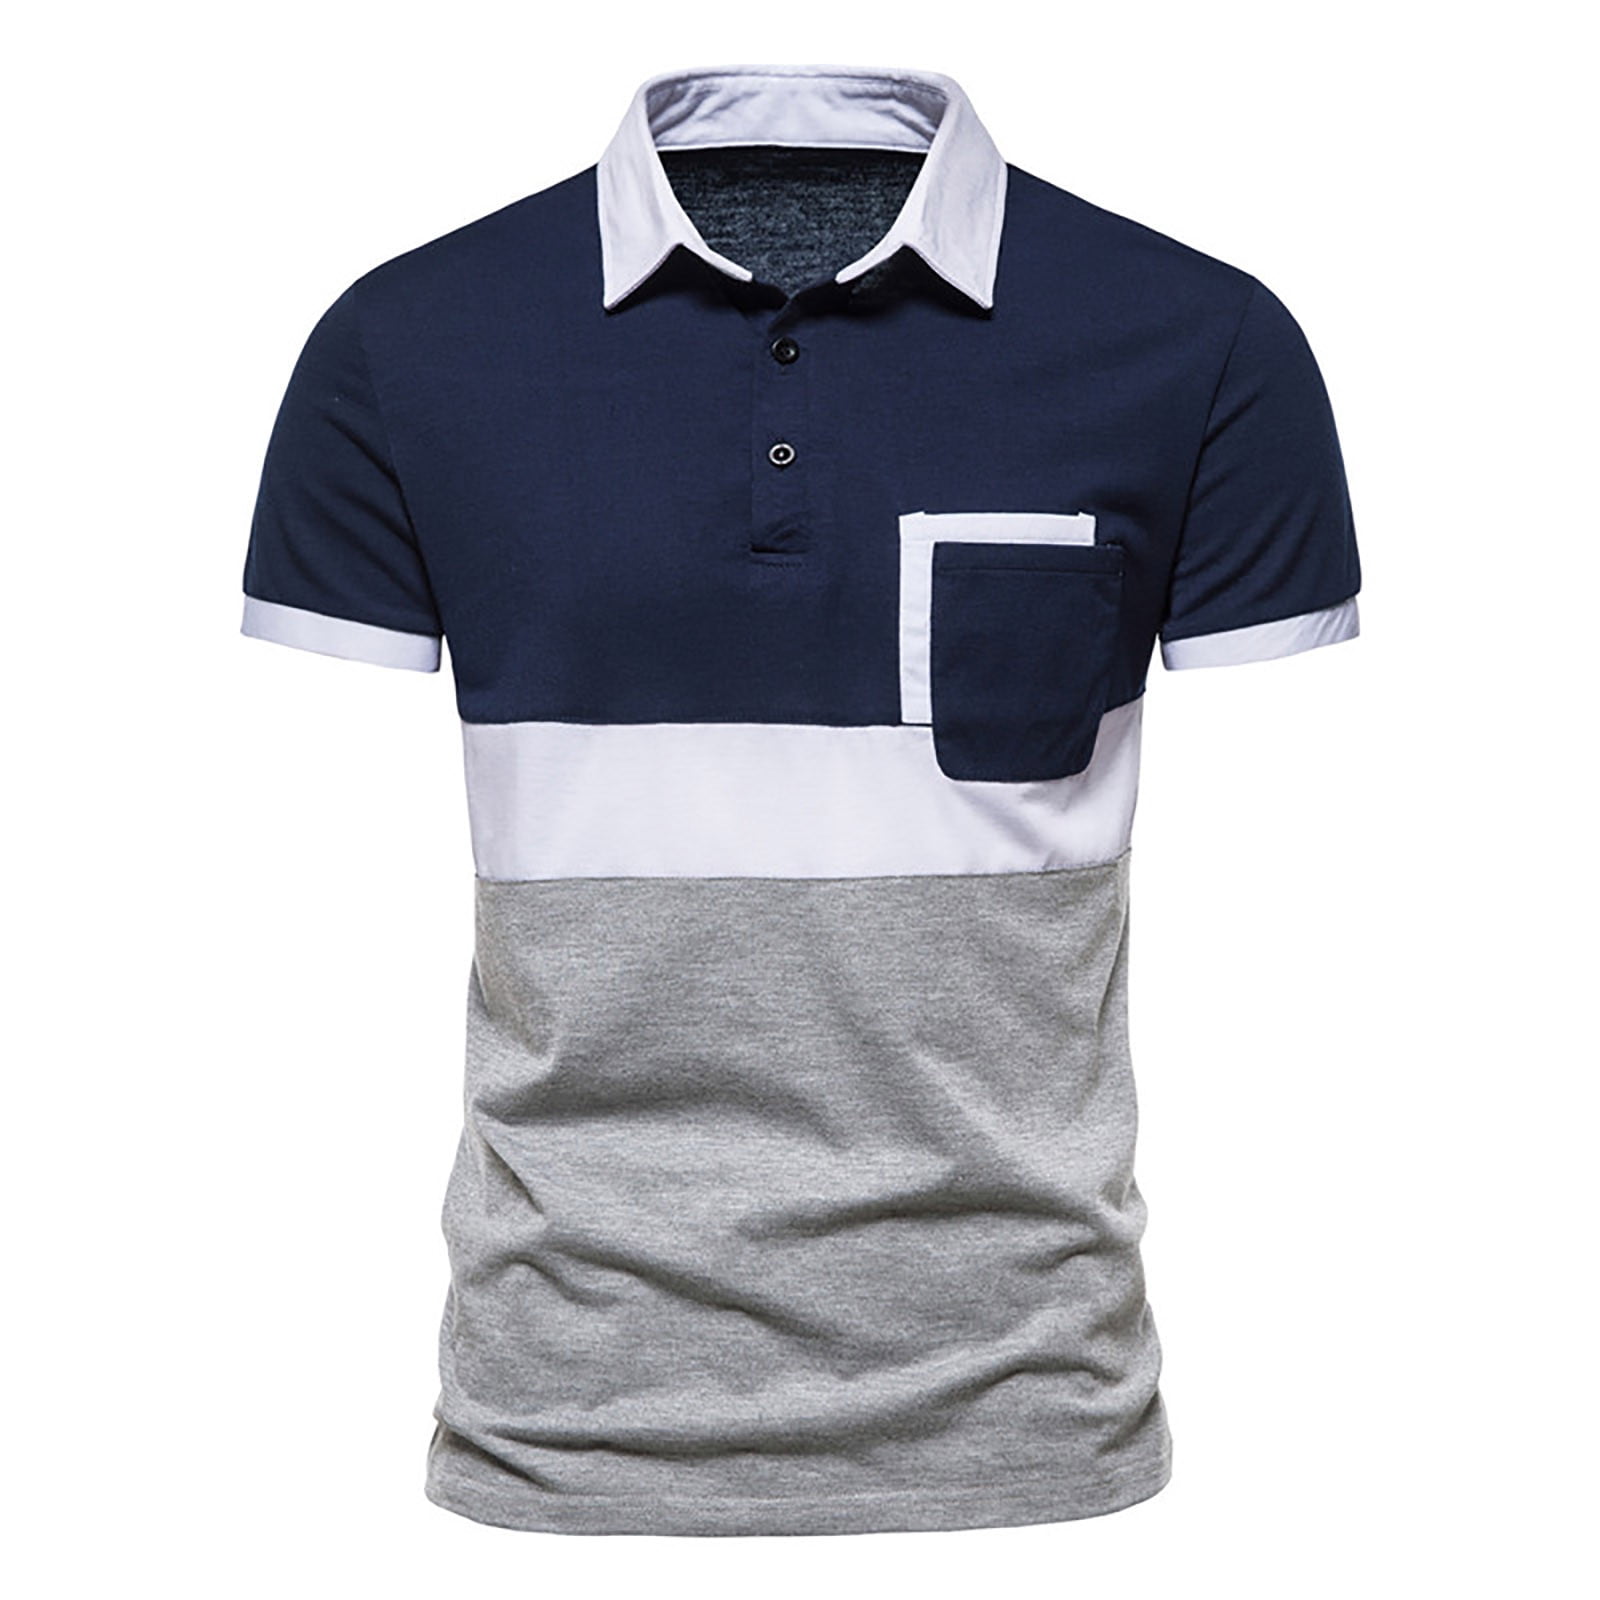 Dovford Men's Polo Shirts with Pocket Cotton Short Sleeve Collared ...